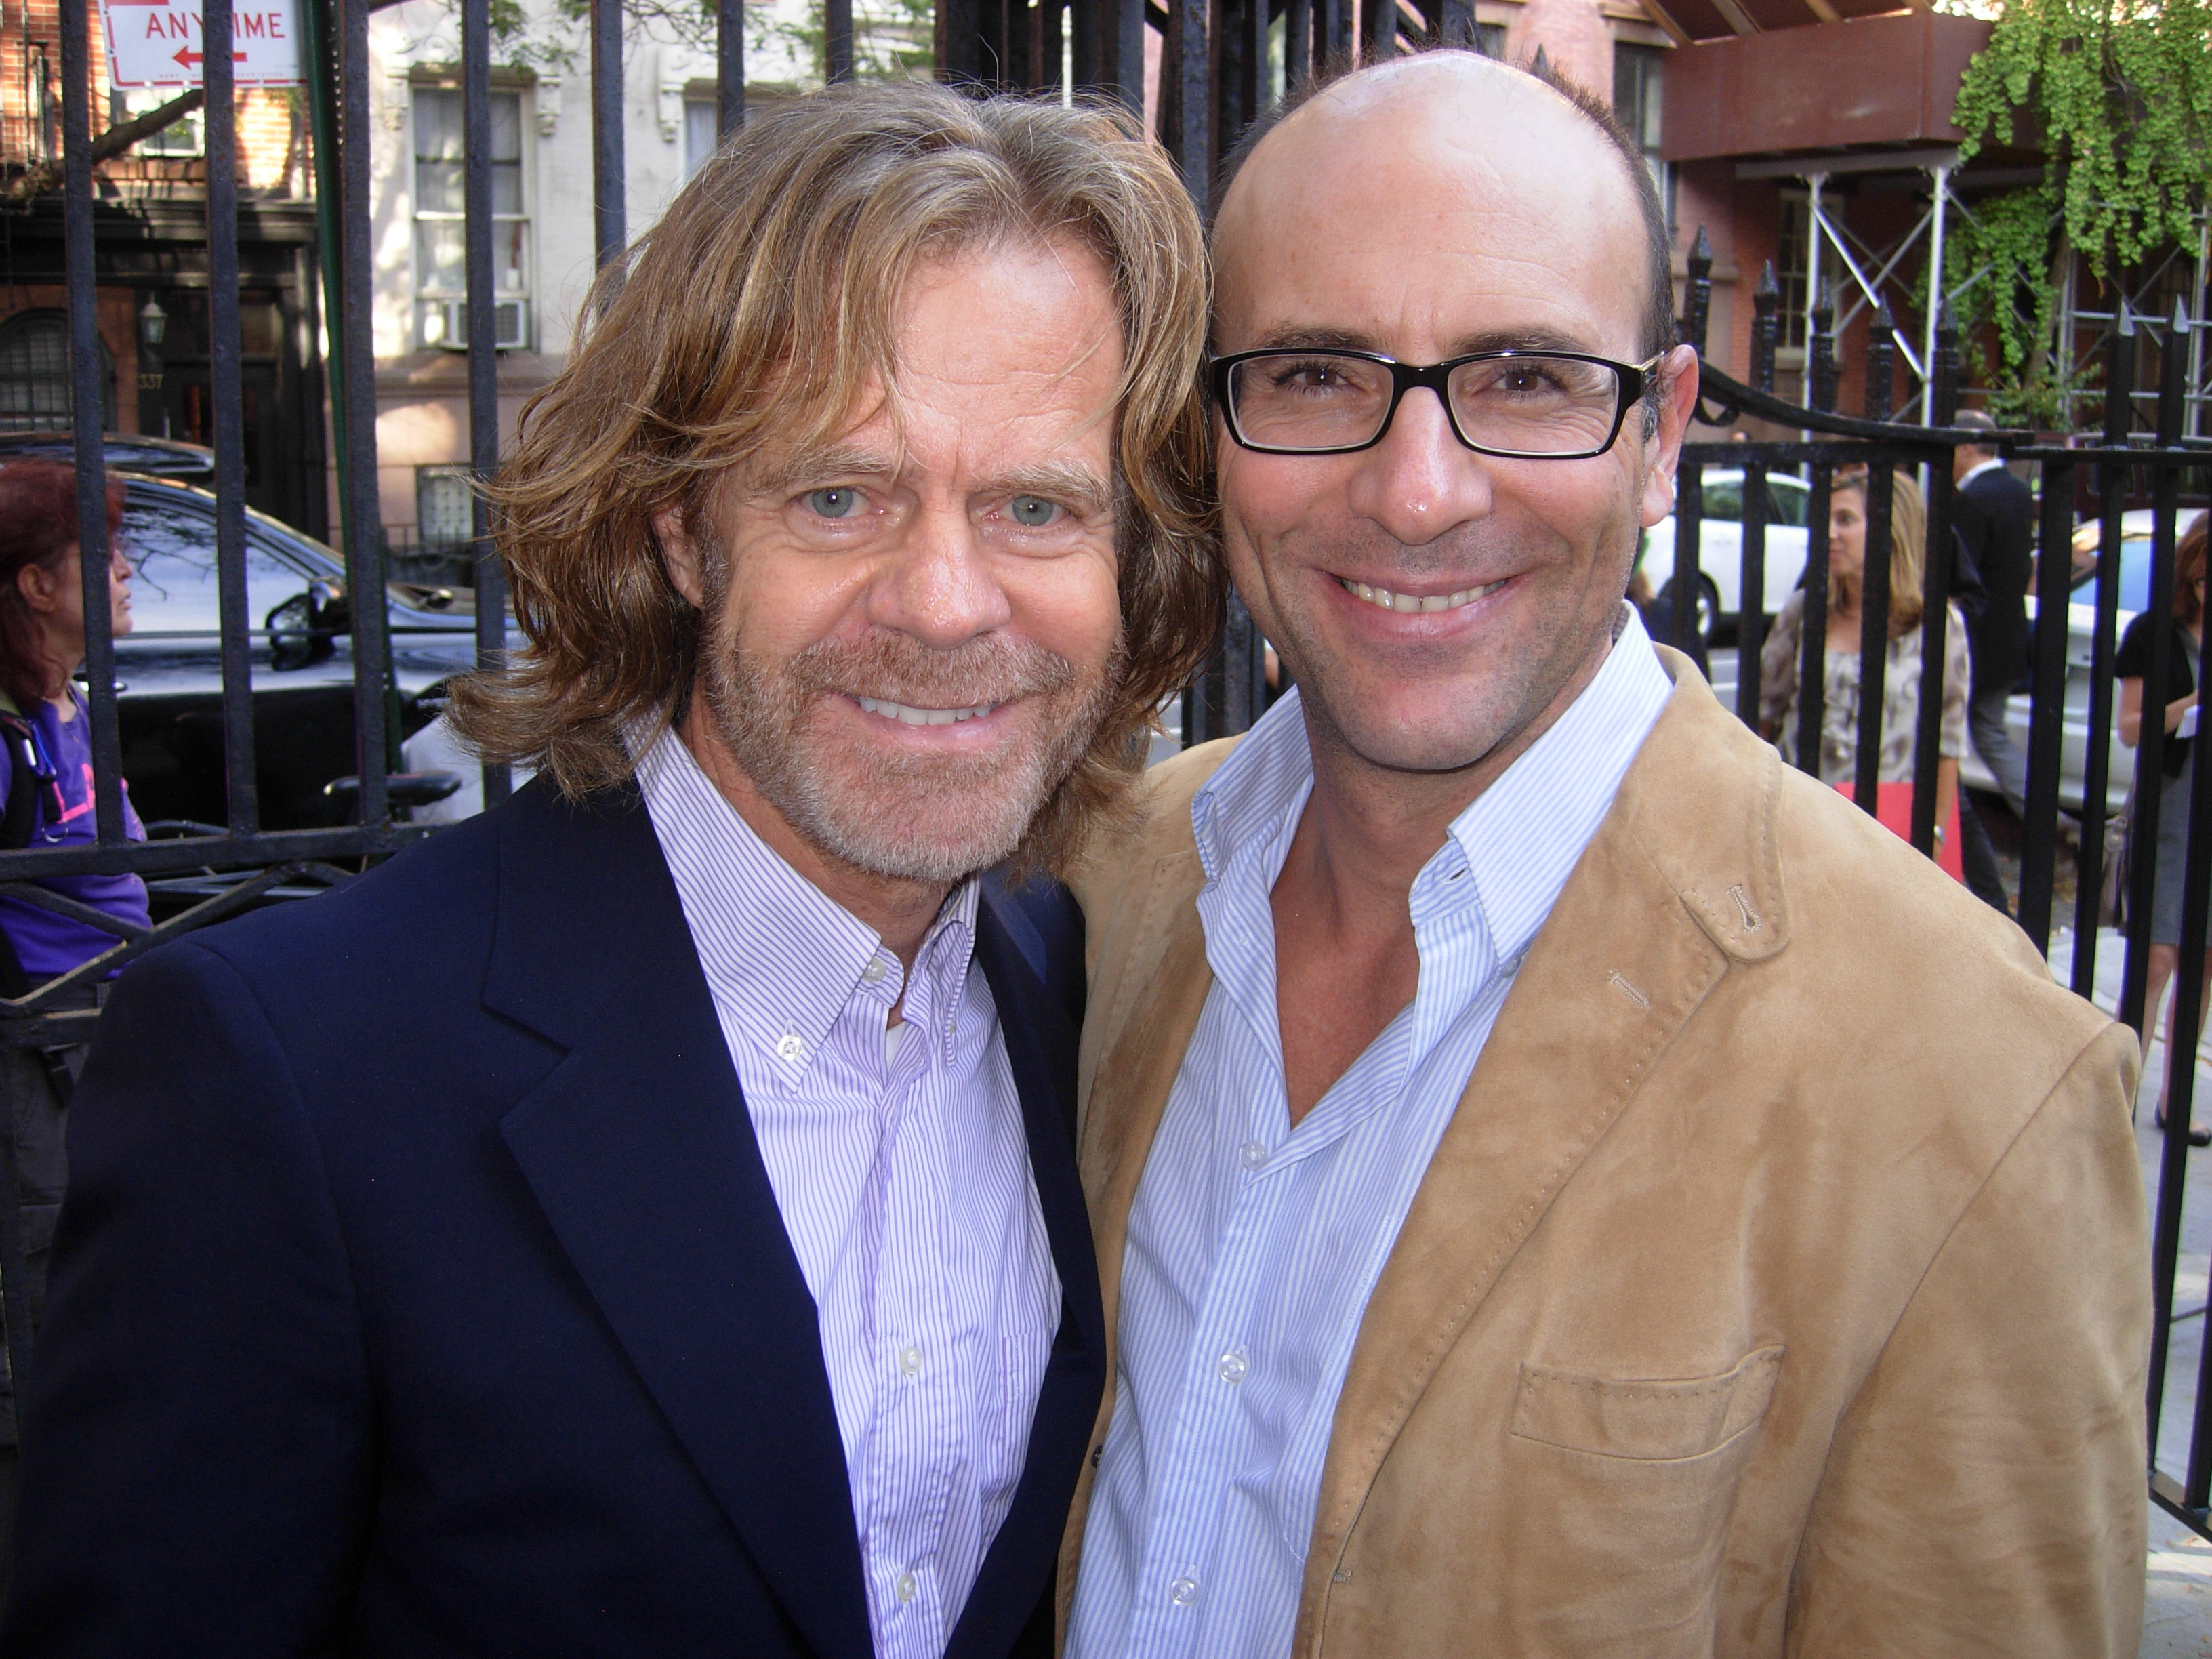 With fellow Atlantic Theater Company member, former director (BOYS' LIFE, THREE SISTERS, THE POPE'S NOSE, THE JOY OF GOING SOMEWHERE DEFINITE), & teacher William H. Macy at the Atlantic Theater Co. (2012).